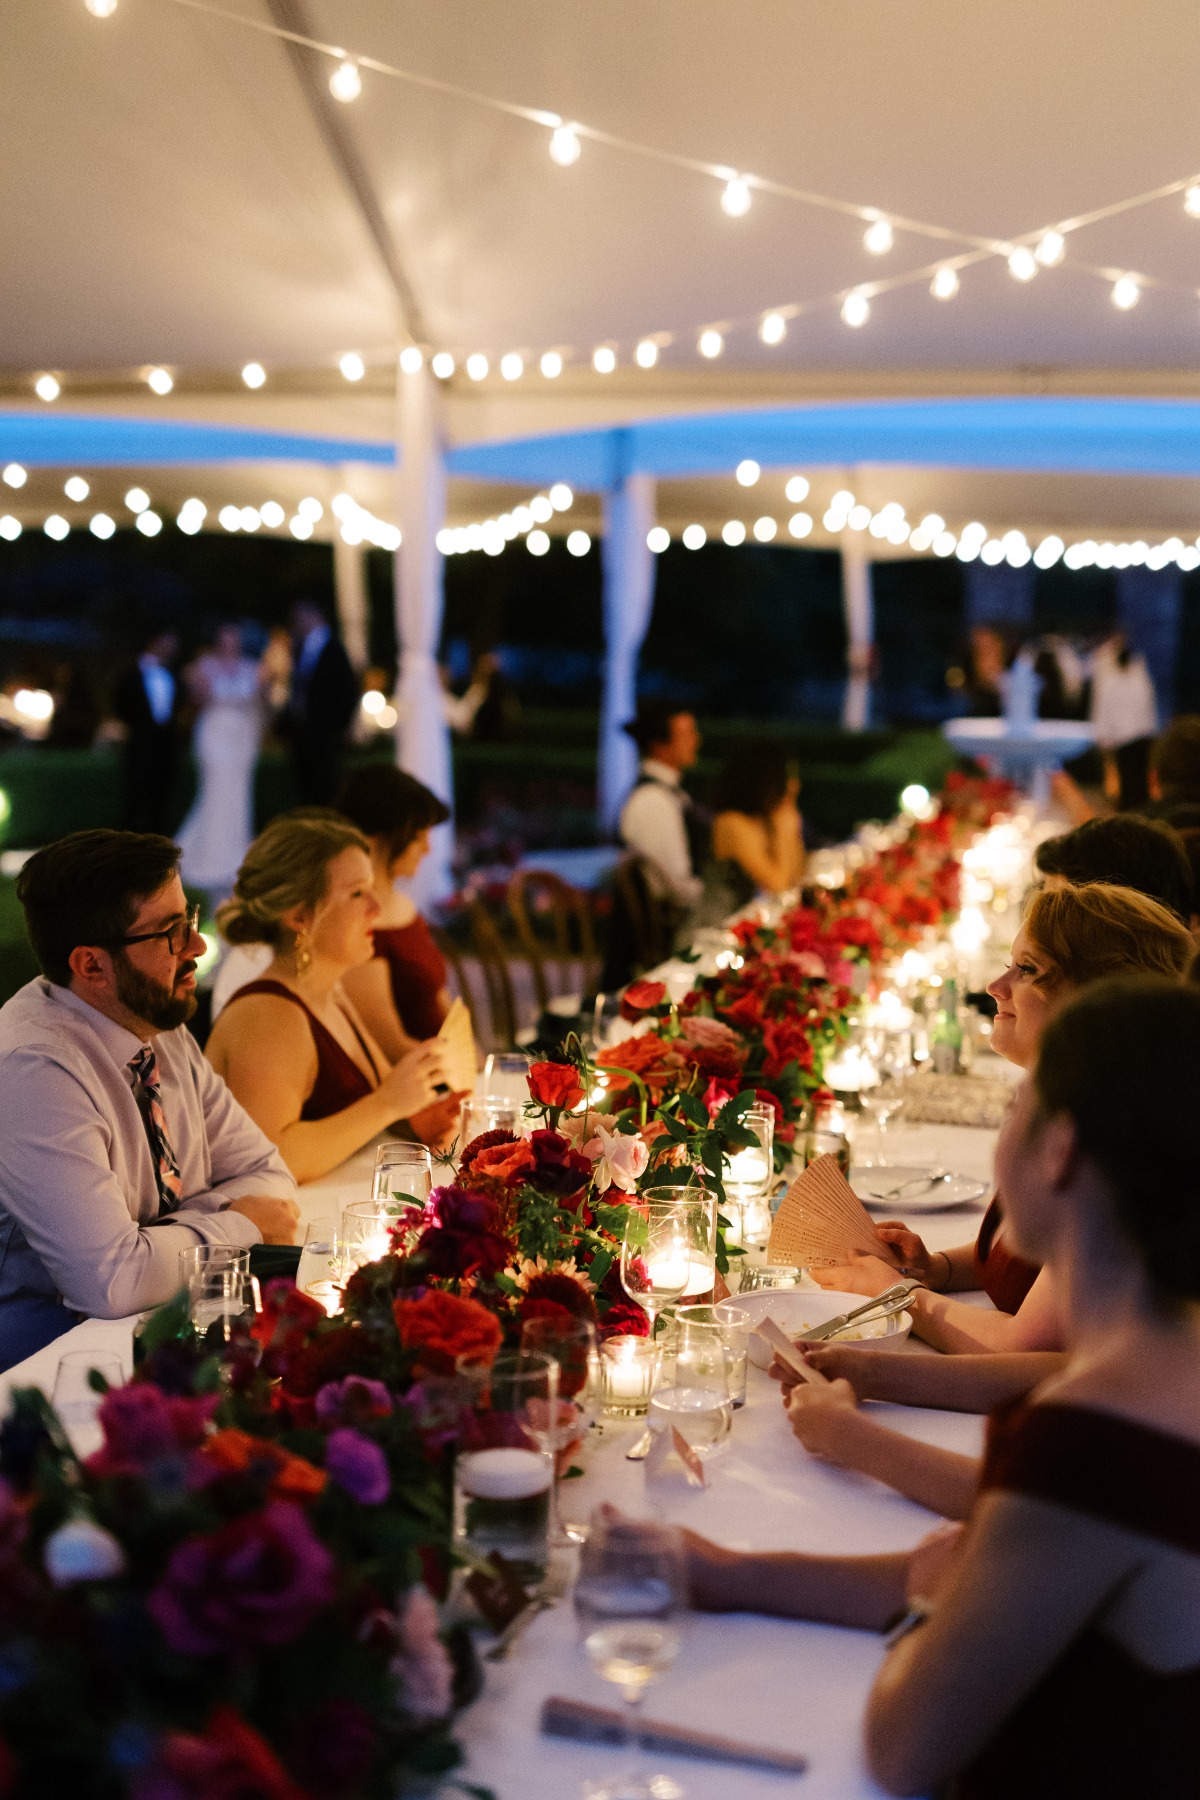 Guests at reception at night under string lights with lit candles and floral table runner